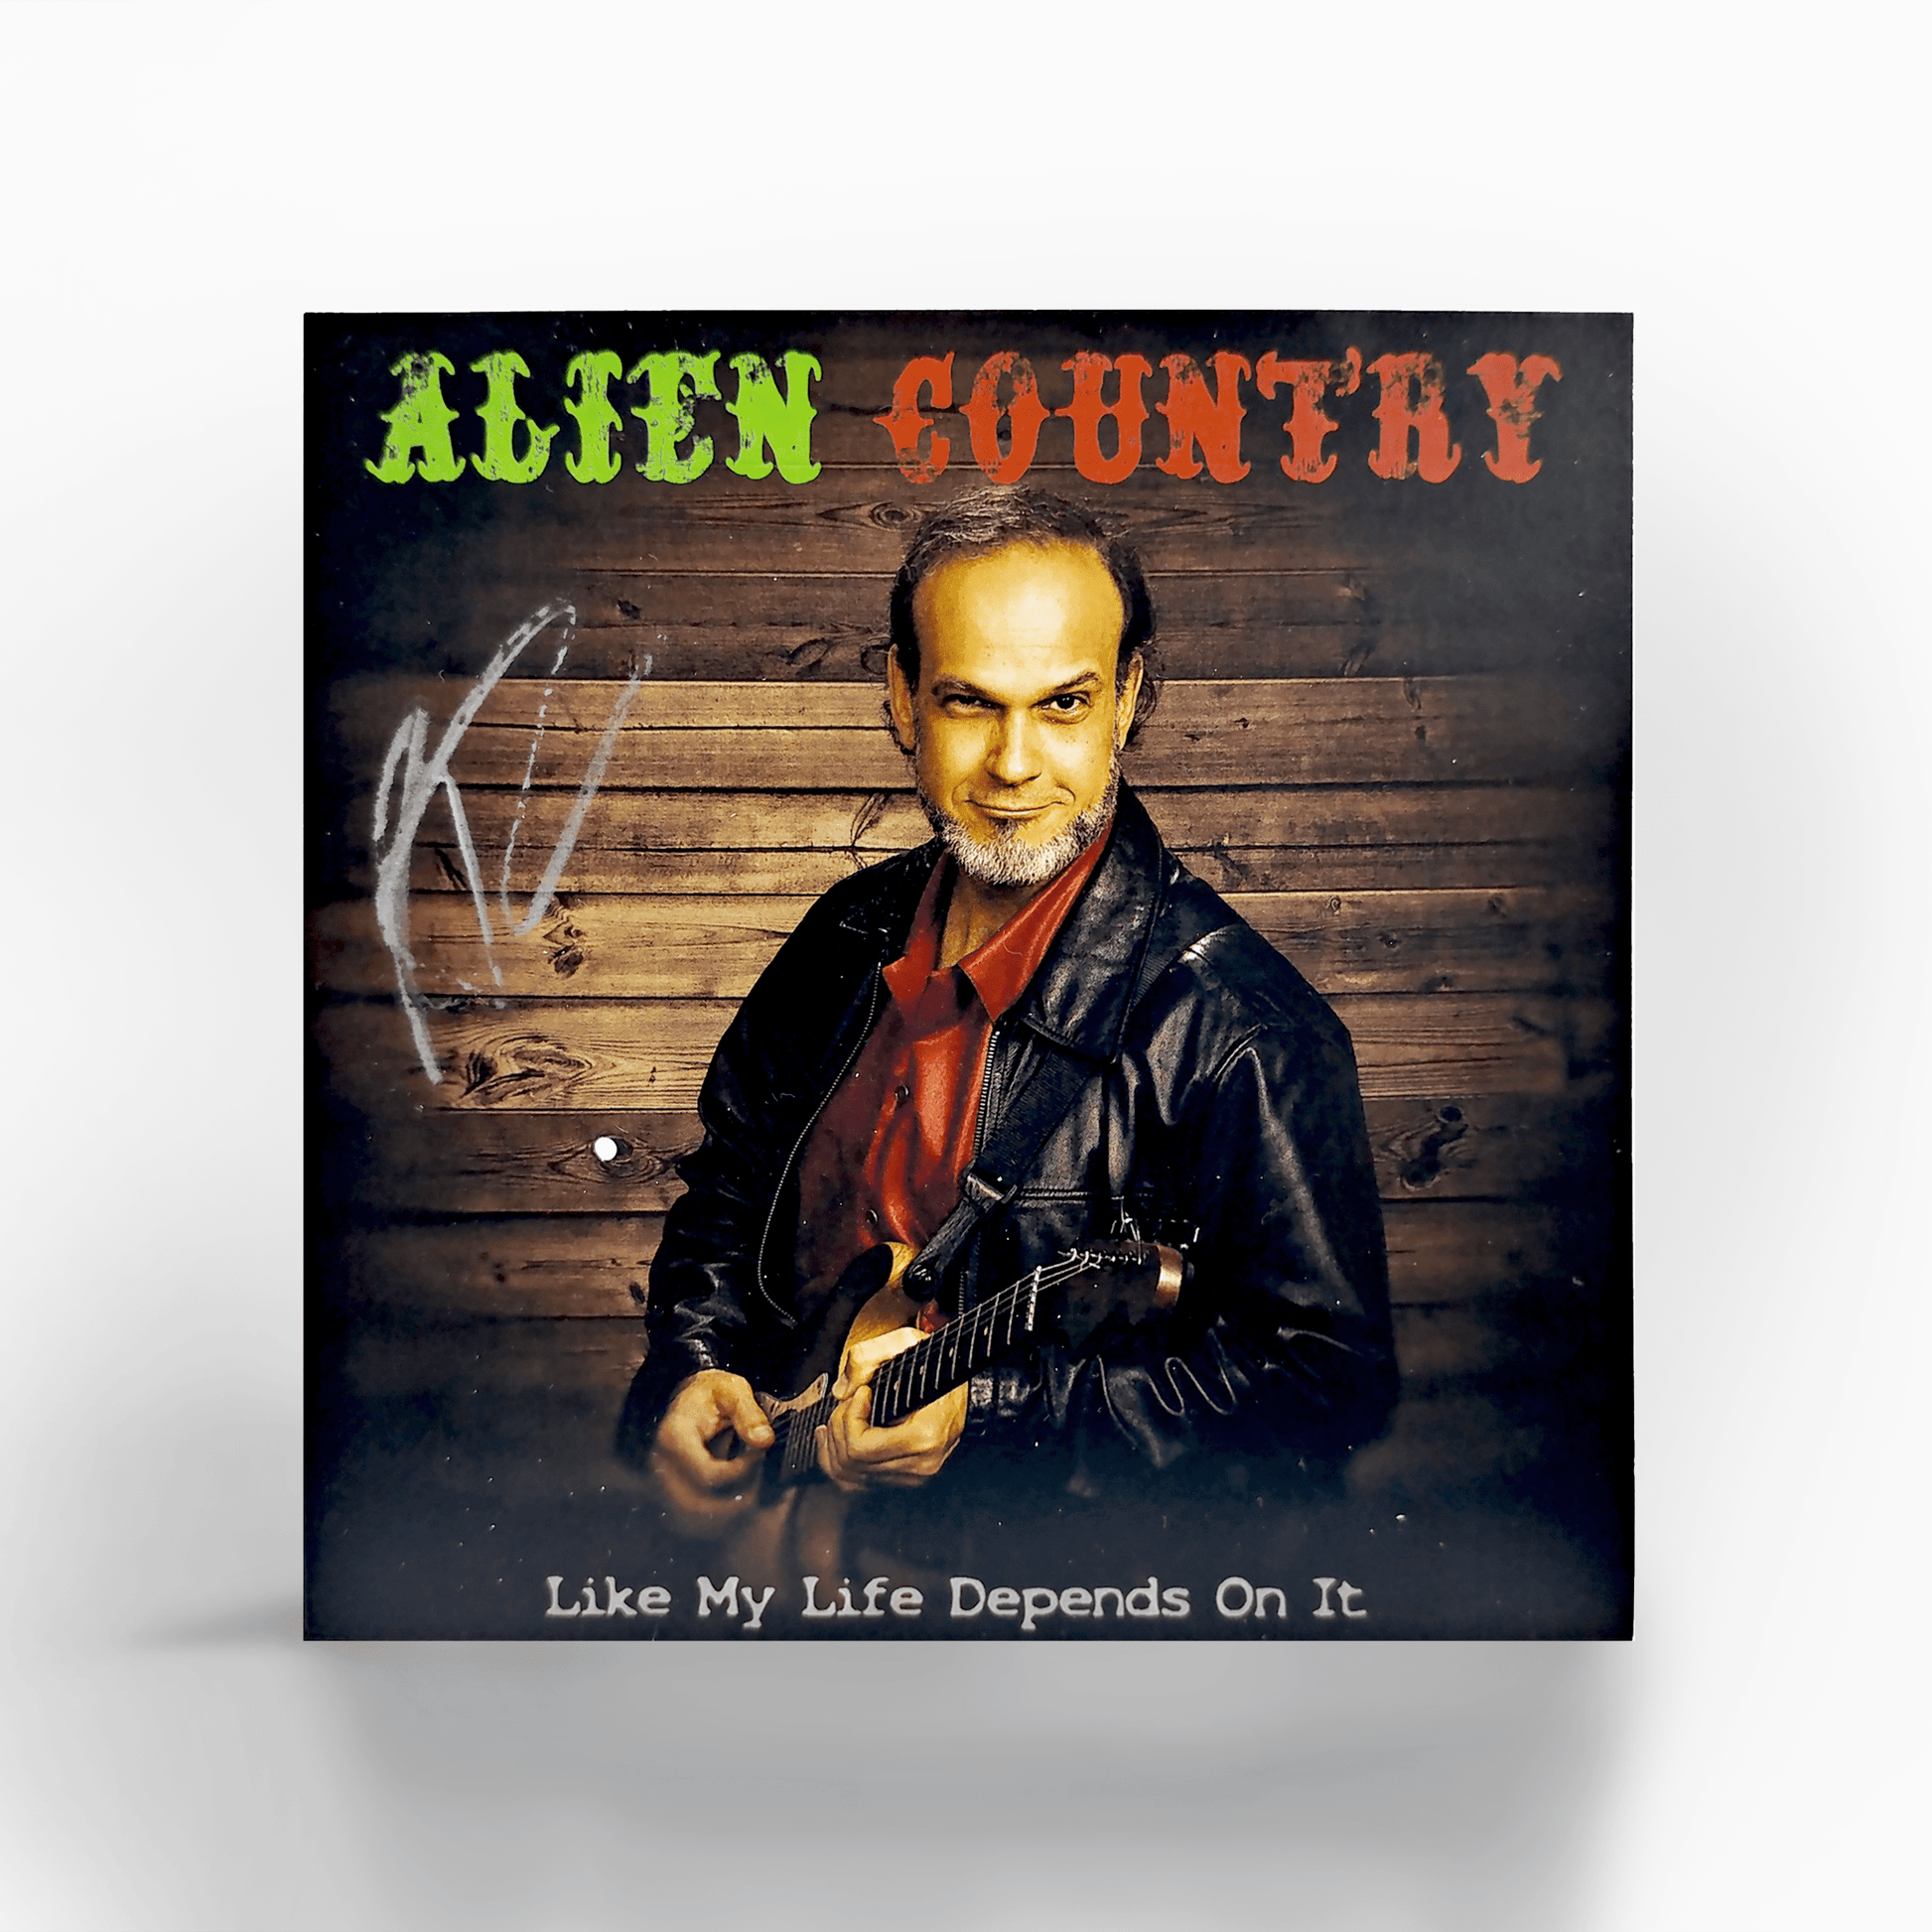 A photo of a CD and it's sleeve. The Sleeve has a picture of Liam Marcus holding an electric guitar. The CD art is a picture of Liam Marcus standing on a scenic  highway with mountains in the background. Scifi country rock